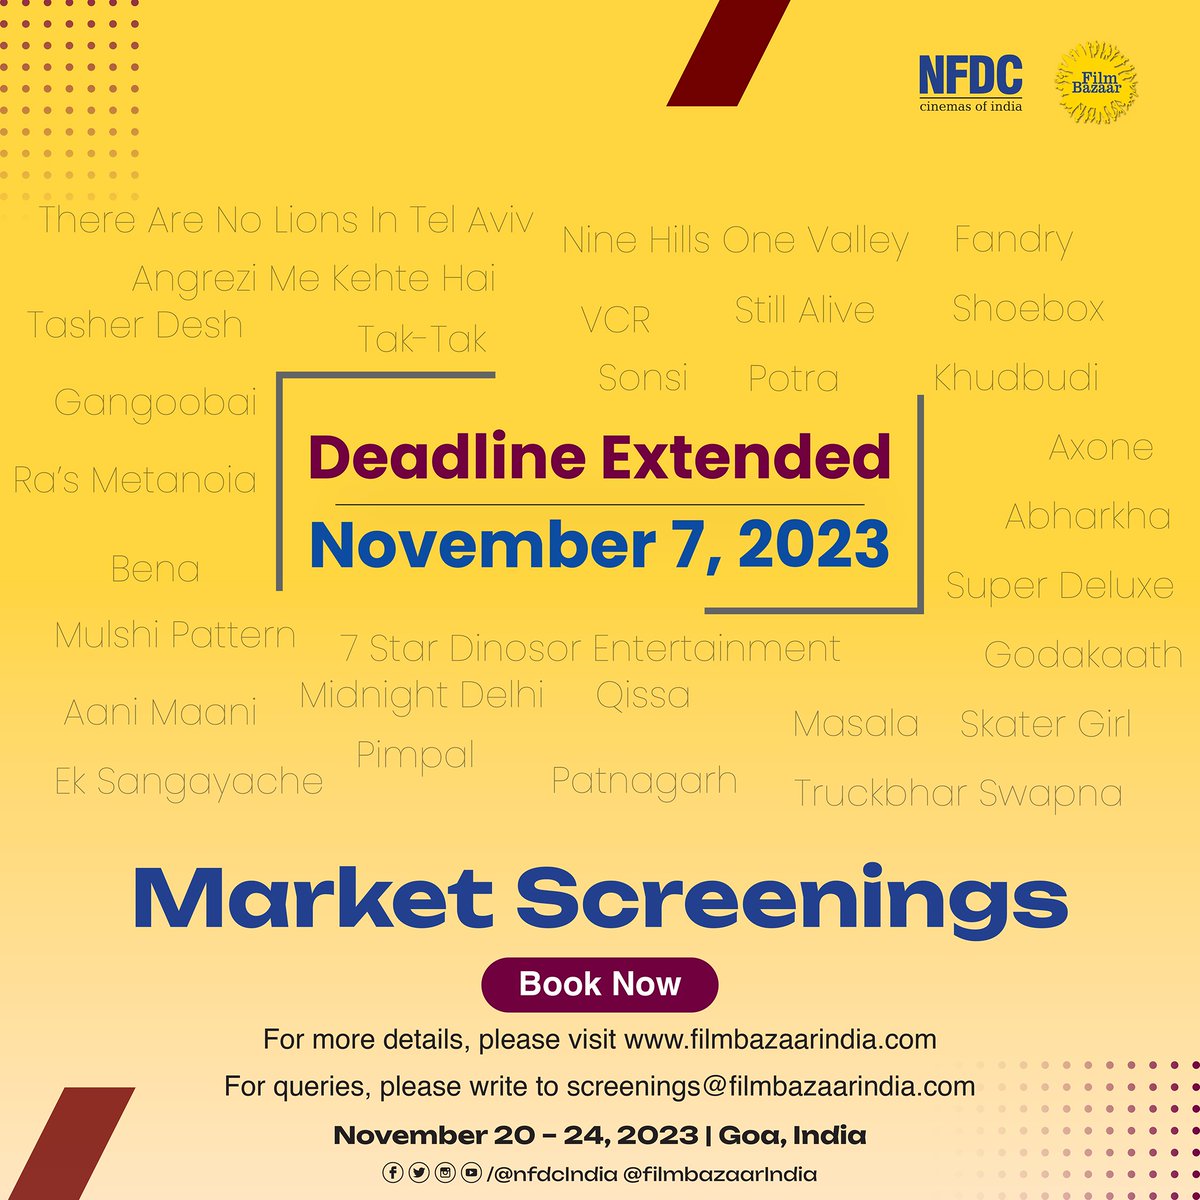 Great news! Market screening booking date has been extended to November 7th. Don't wait, secure your spot today! Showcase your films to sales agents, distributors, producers, and festival programmers from around the world. Please visit our new website filmbazaarindia.com